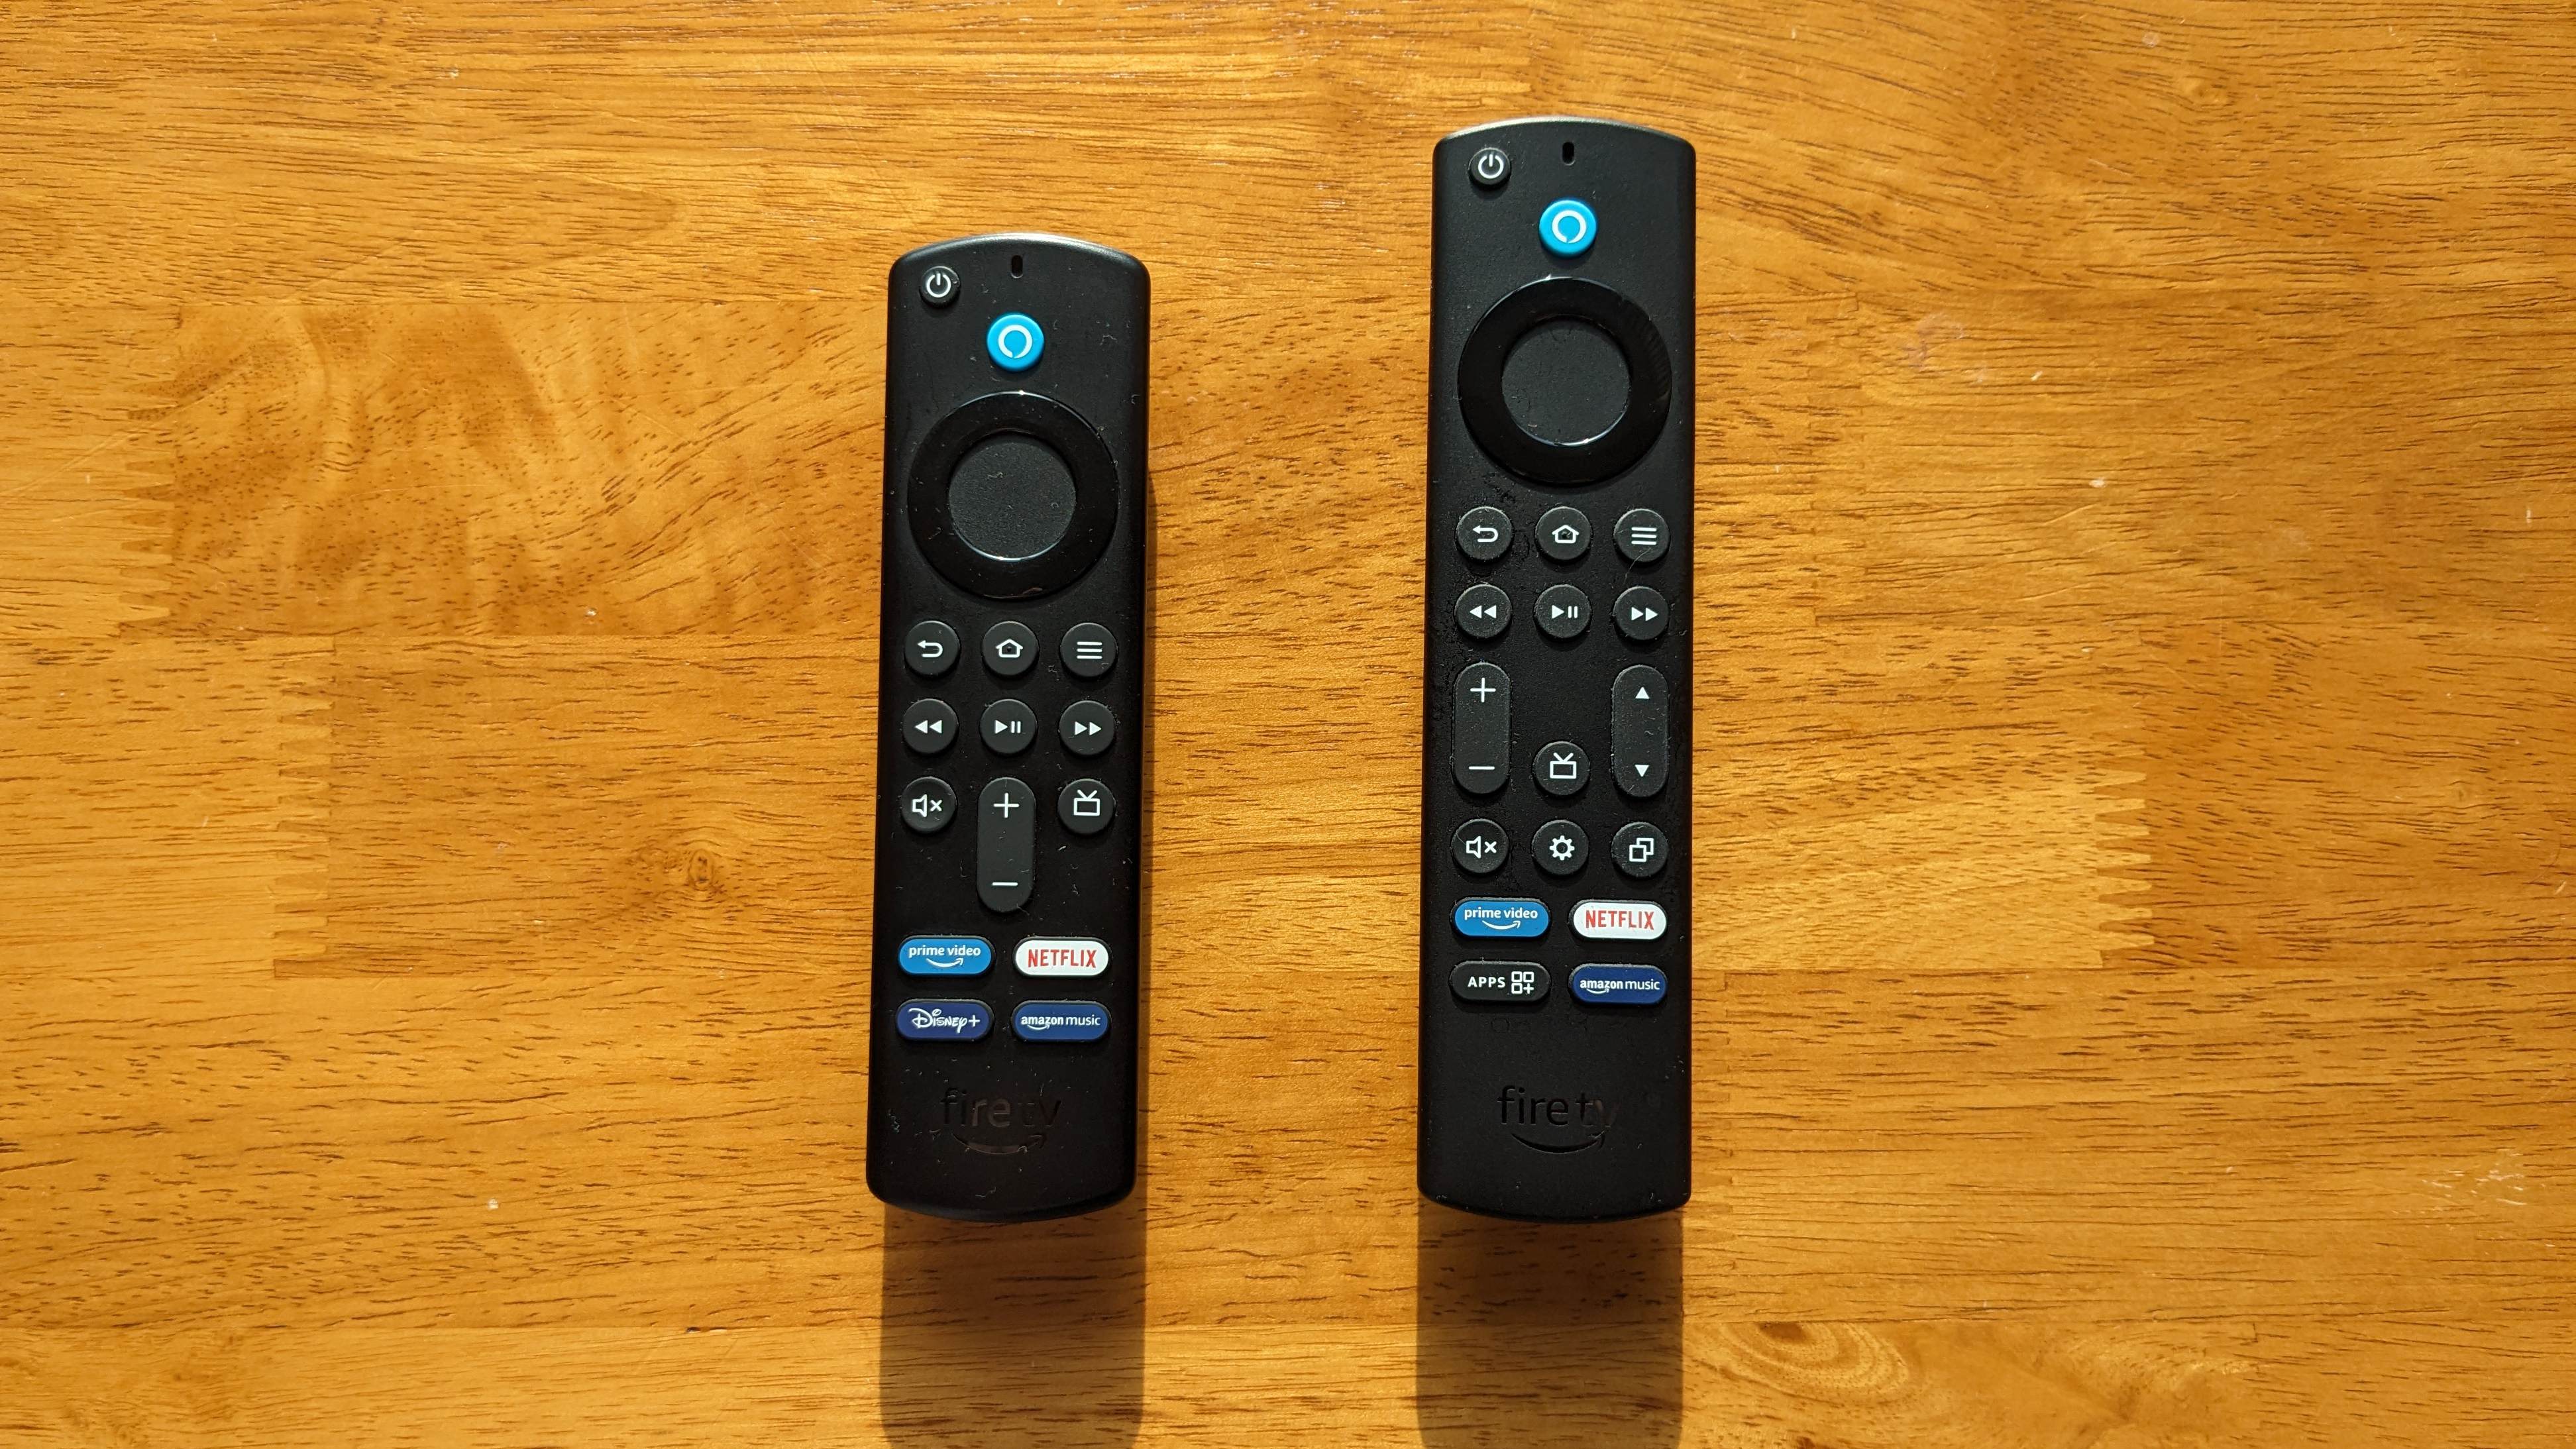 The Amazon Fire TV Stick 4K and Amazon Fire TV Stick 4K Max remotes side by side on a wooden table